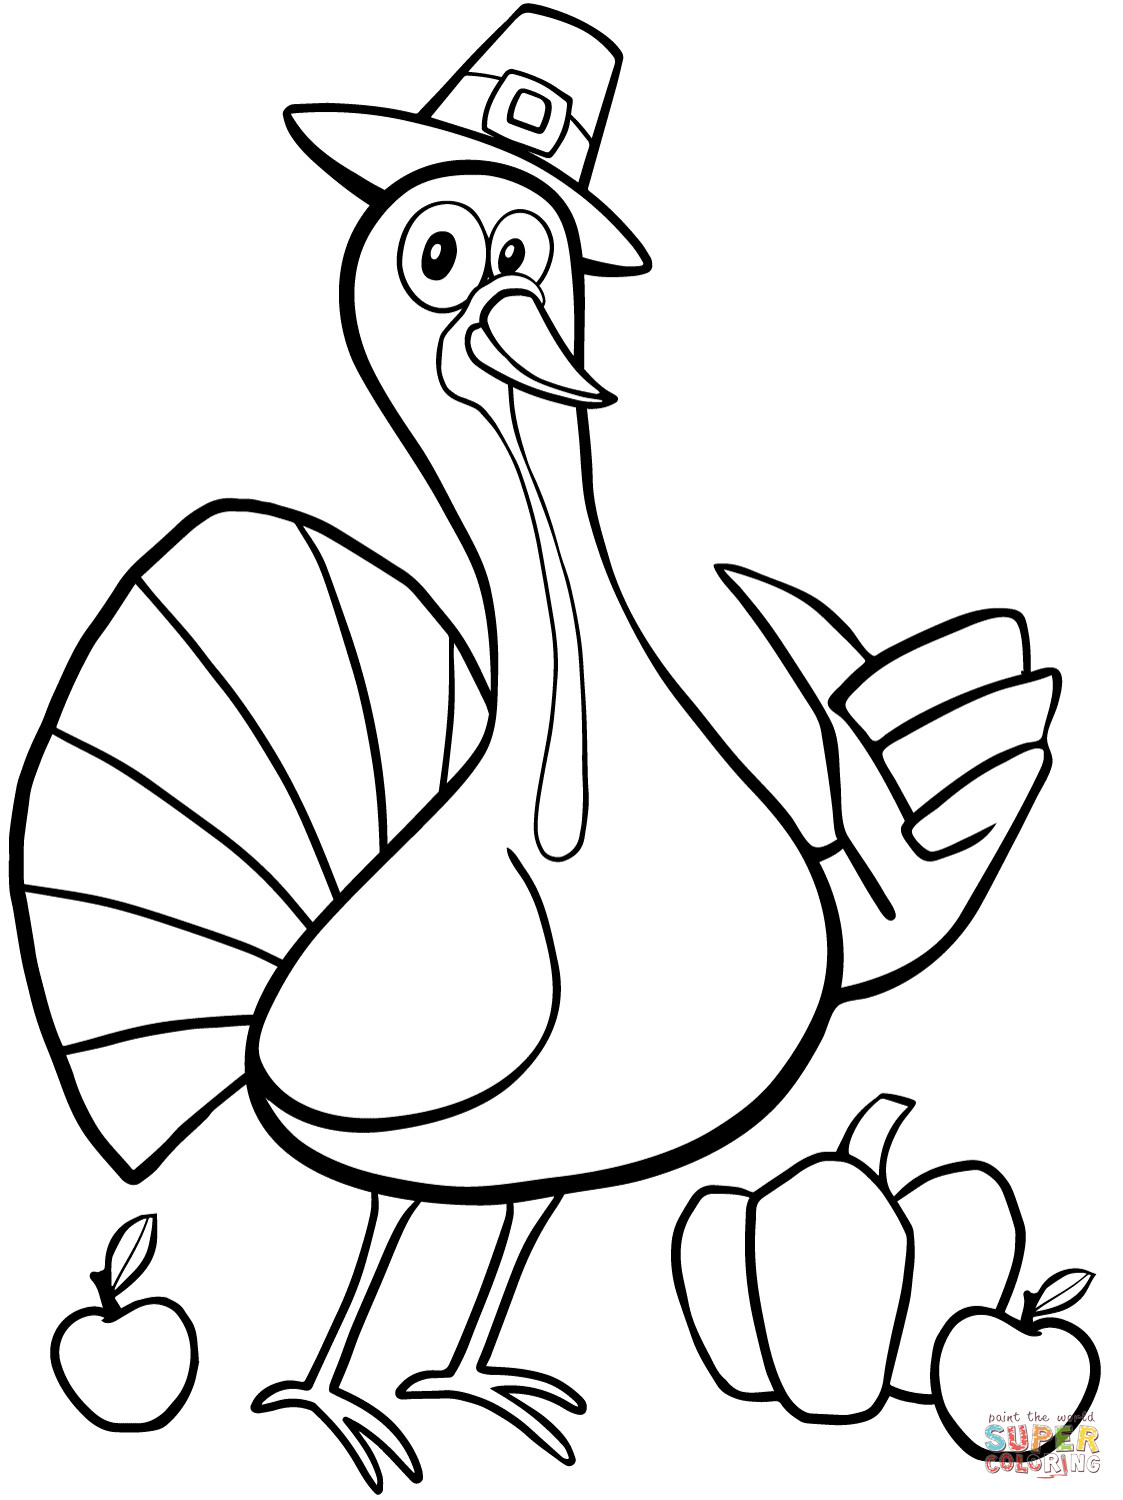 Thanksgiving Turkey To Color
 Cool Thanksgiving Turkey coloring page